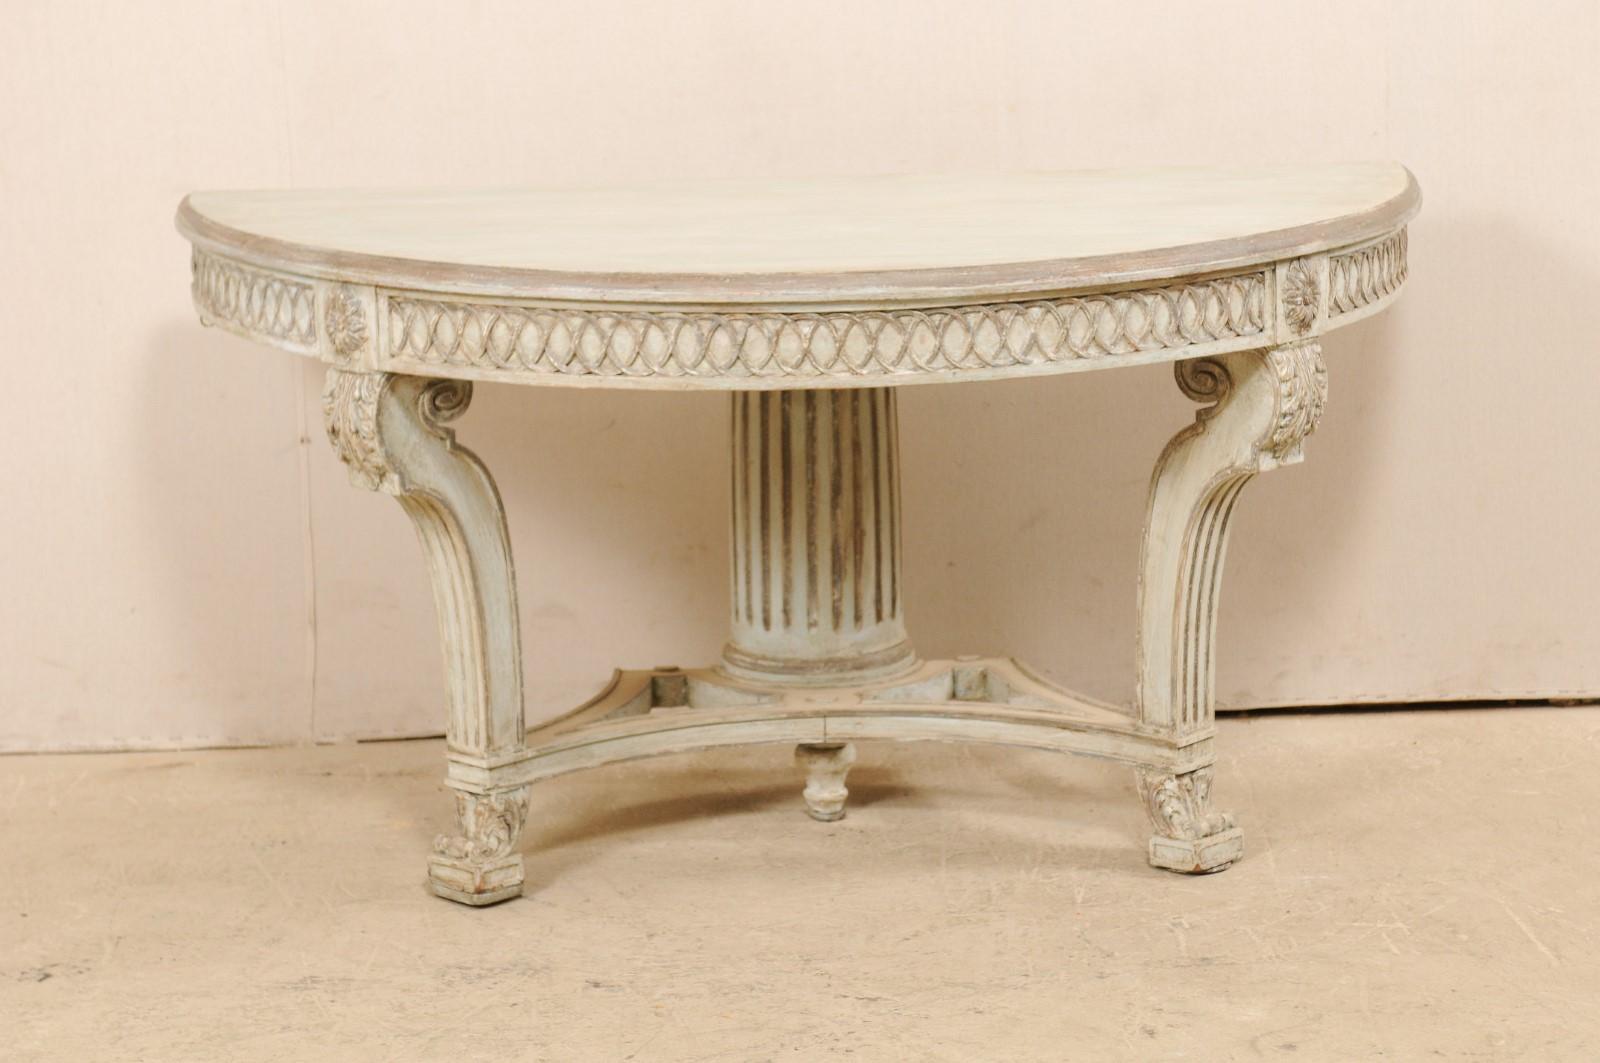 An Italian half-round console table with nicely carved details from the mid-20th century. This vintage demilune table from Italy features a halved-moon shaped top, with thick apron beneath which has been carved in an overlaying circular motif,